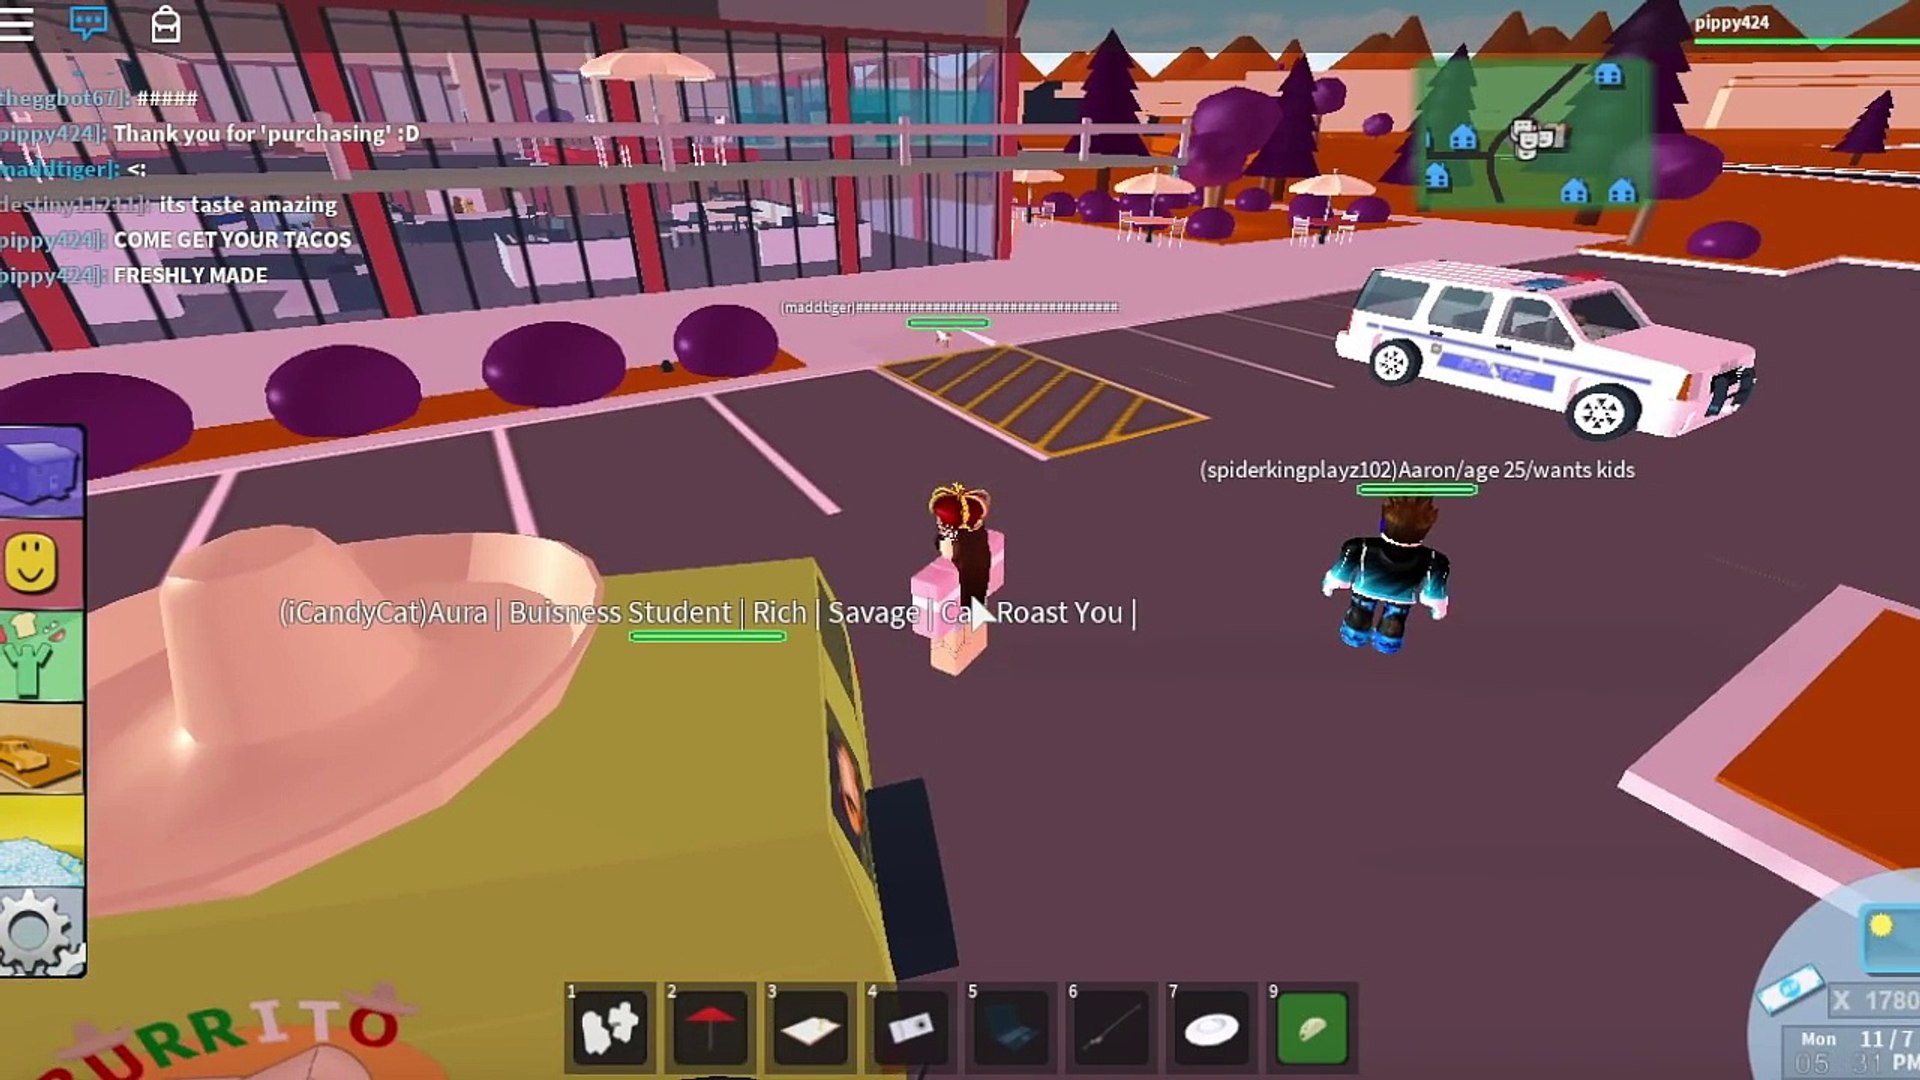 Roblox Bloxburg Neighborhood Roblox Codes For Robux Pc - outfits the neighborhood of robloxia v5 roblox the